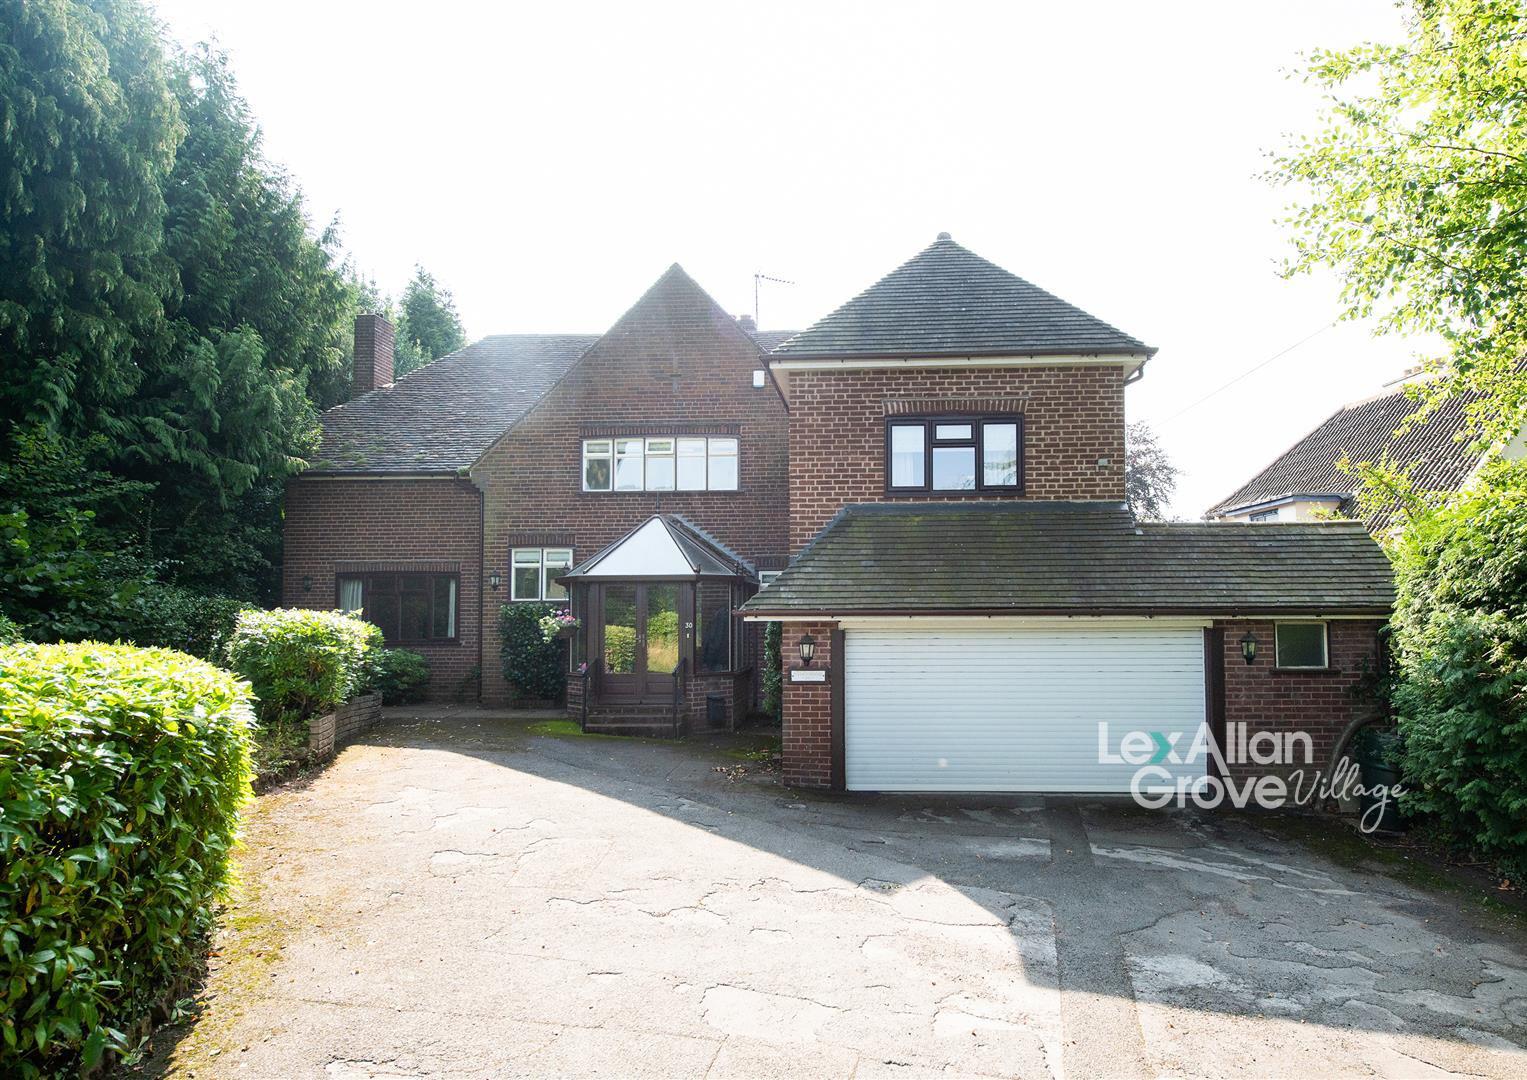 5 bed detached house for sale in Middlefield Lane, Stourbridge - Property Image 1